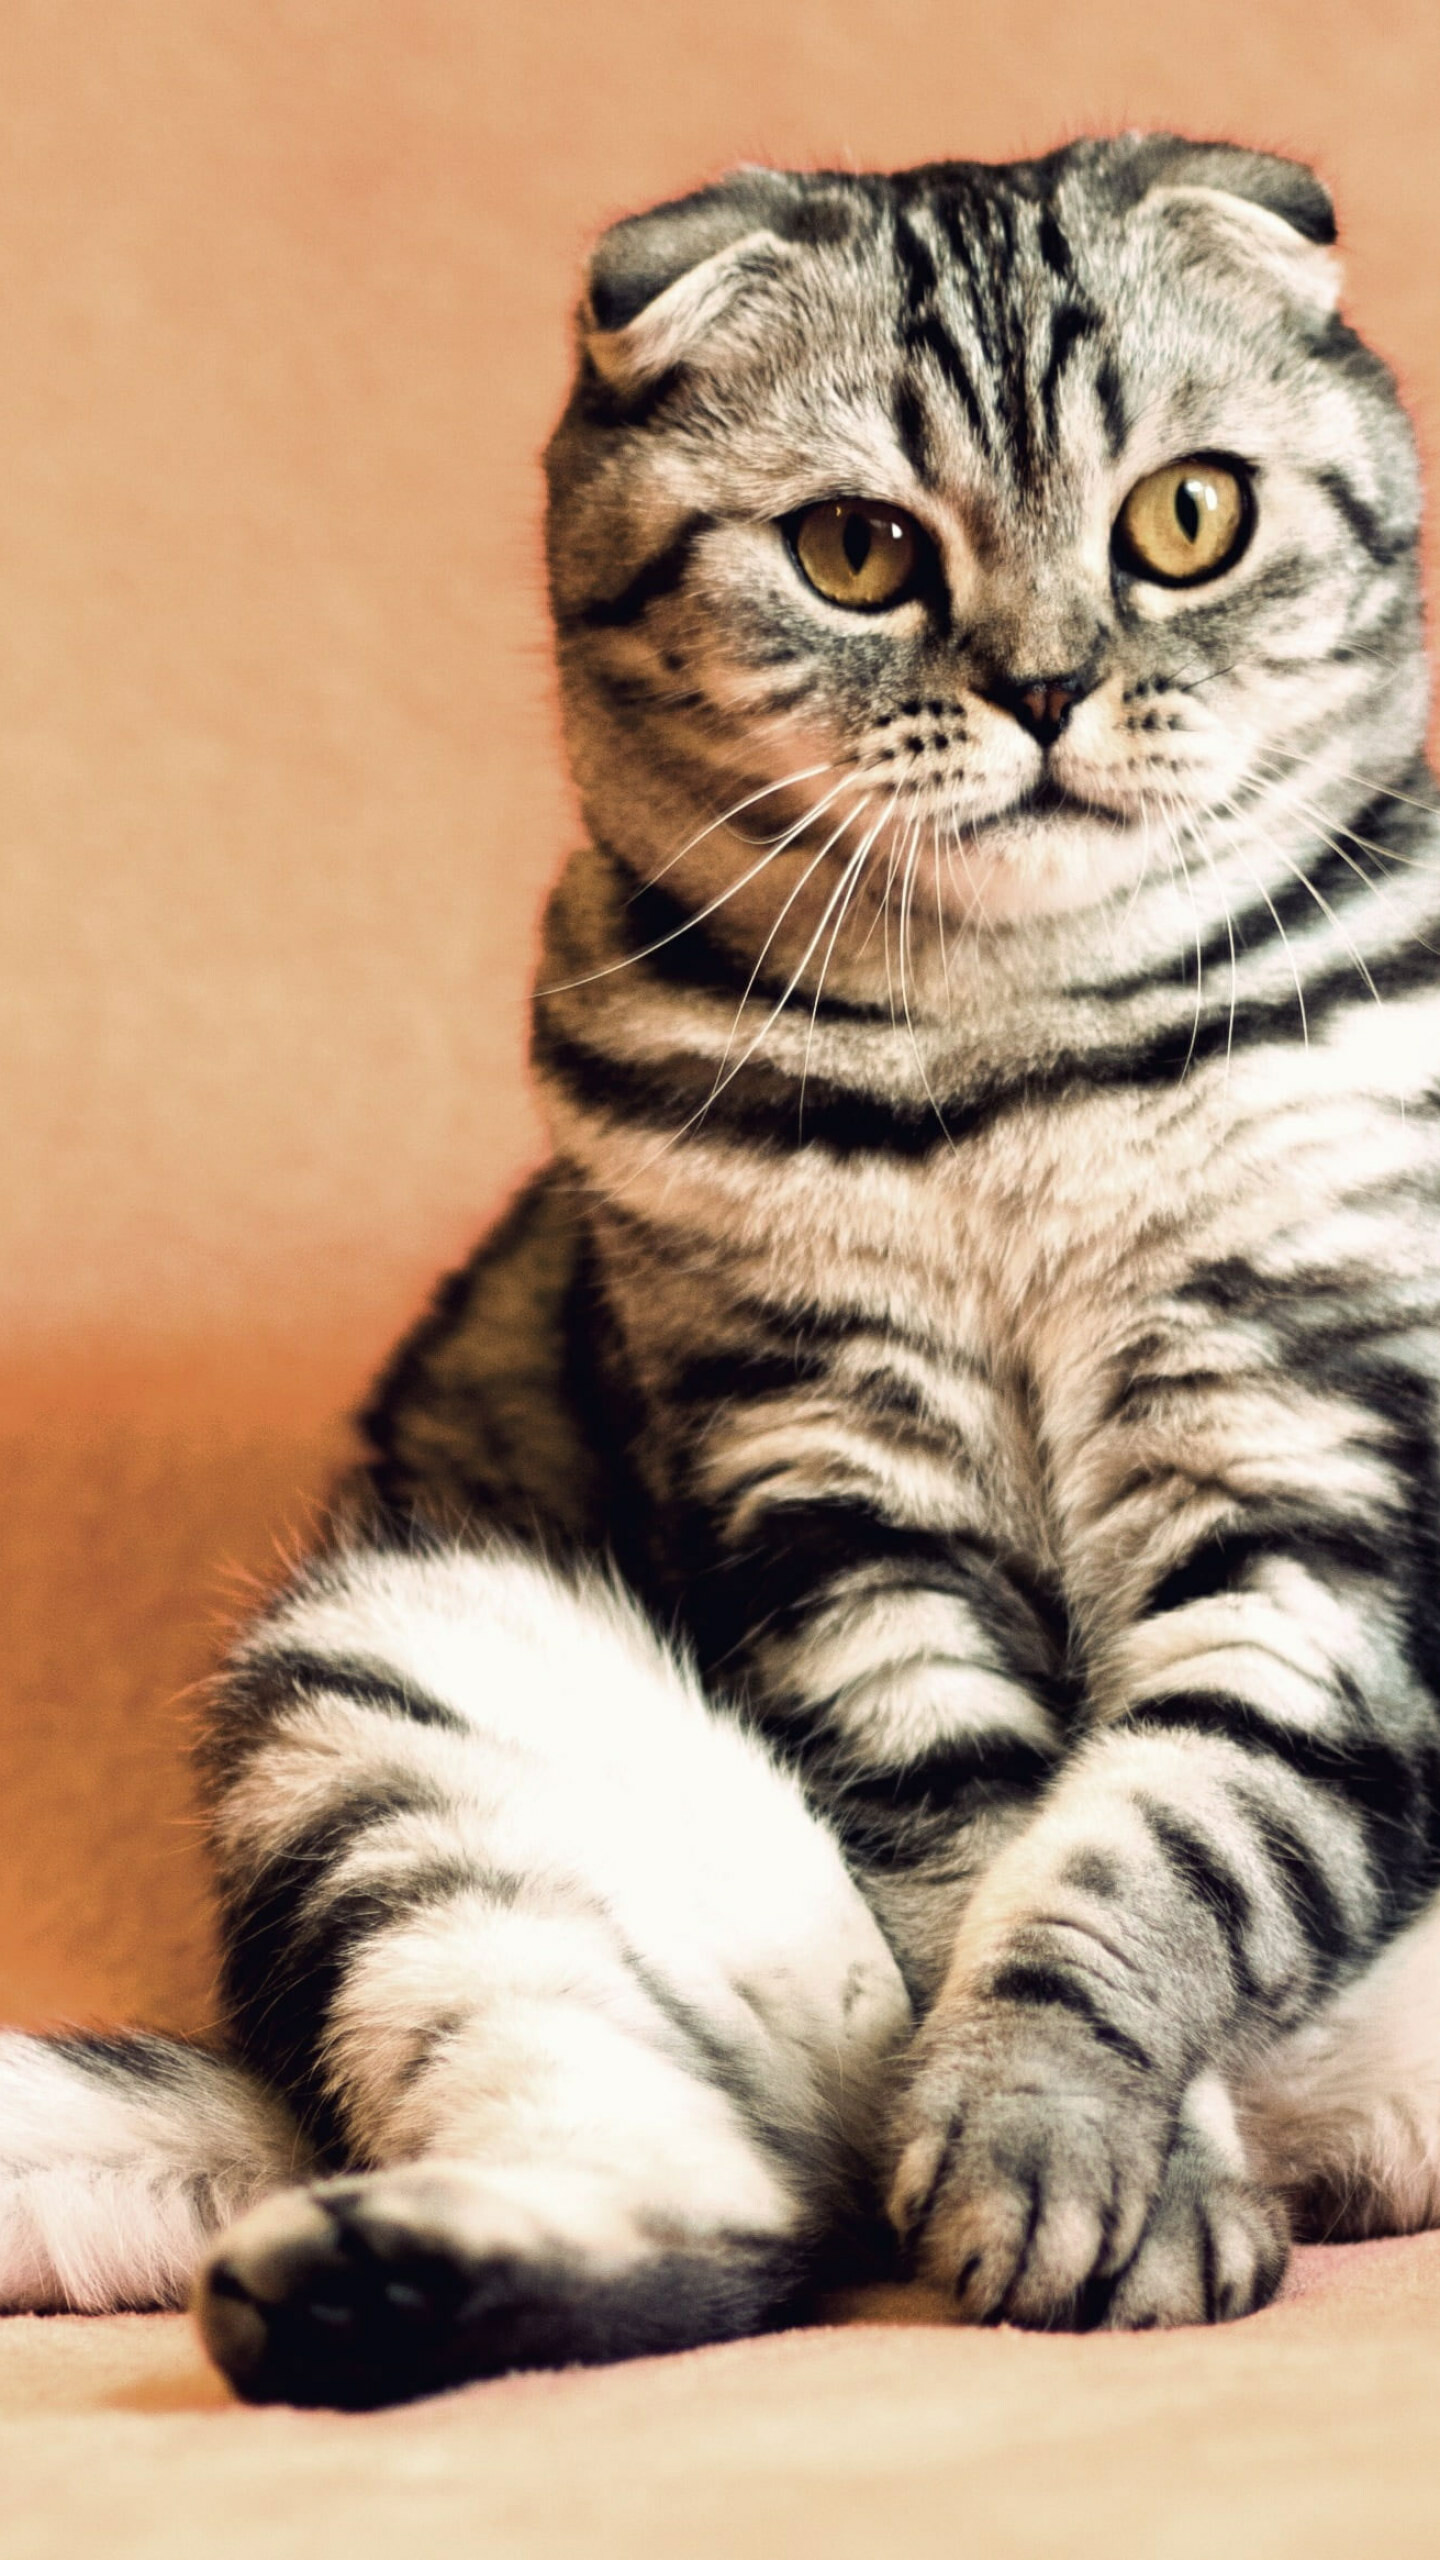 Scottish Fold: Despite being folded, the Fold’s ears are still expressive and swivel to listen, lay back in anger, and prick up when a can of food is opened. 1440x2560 HD Wallpaper.